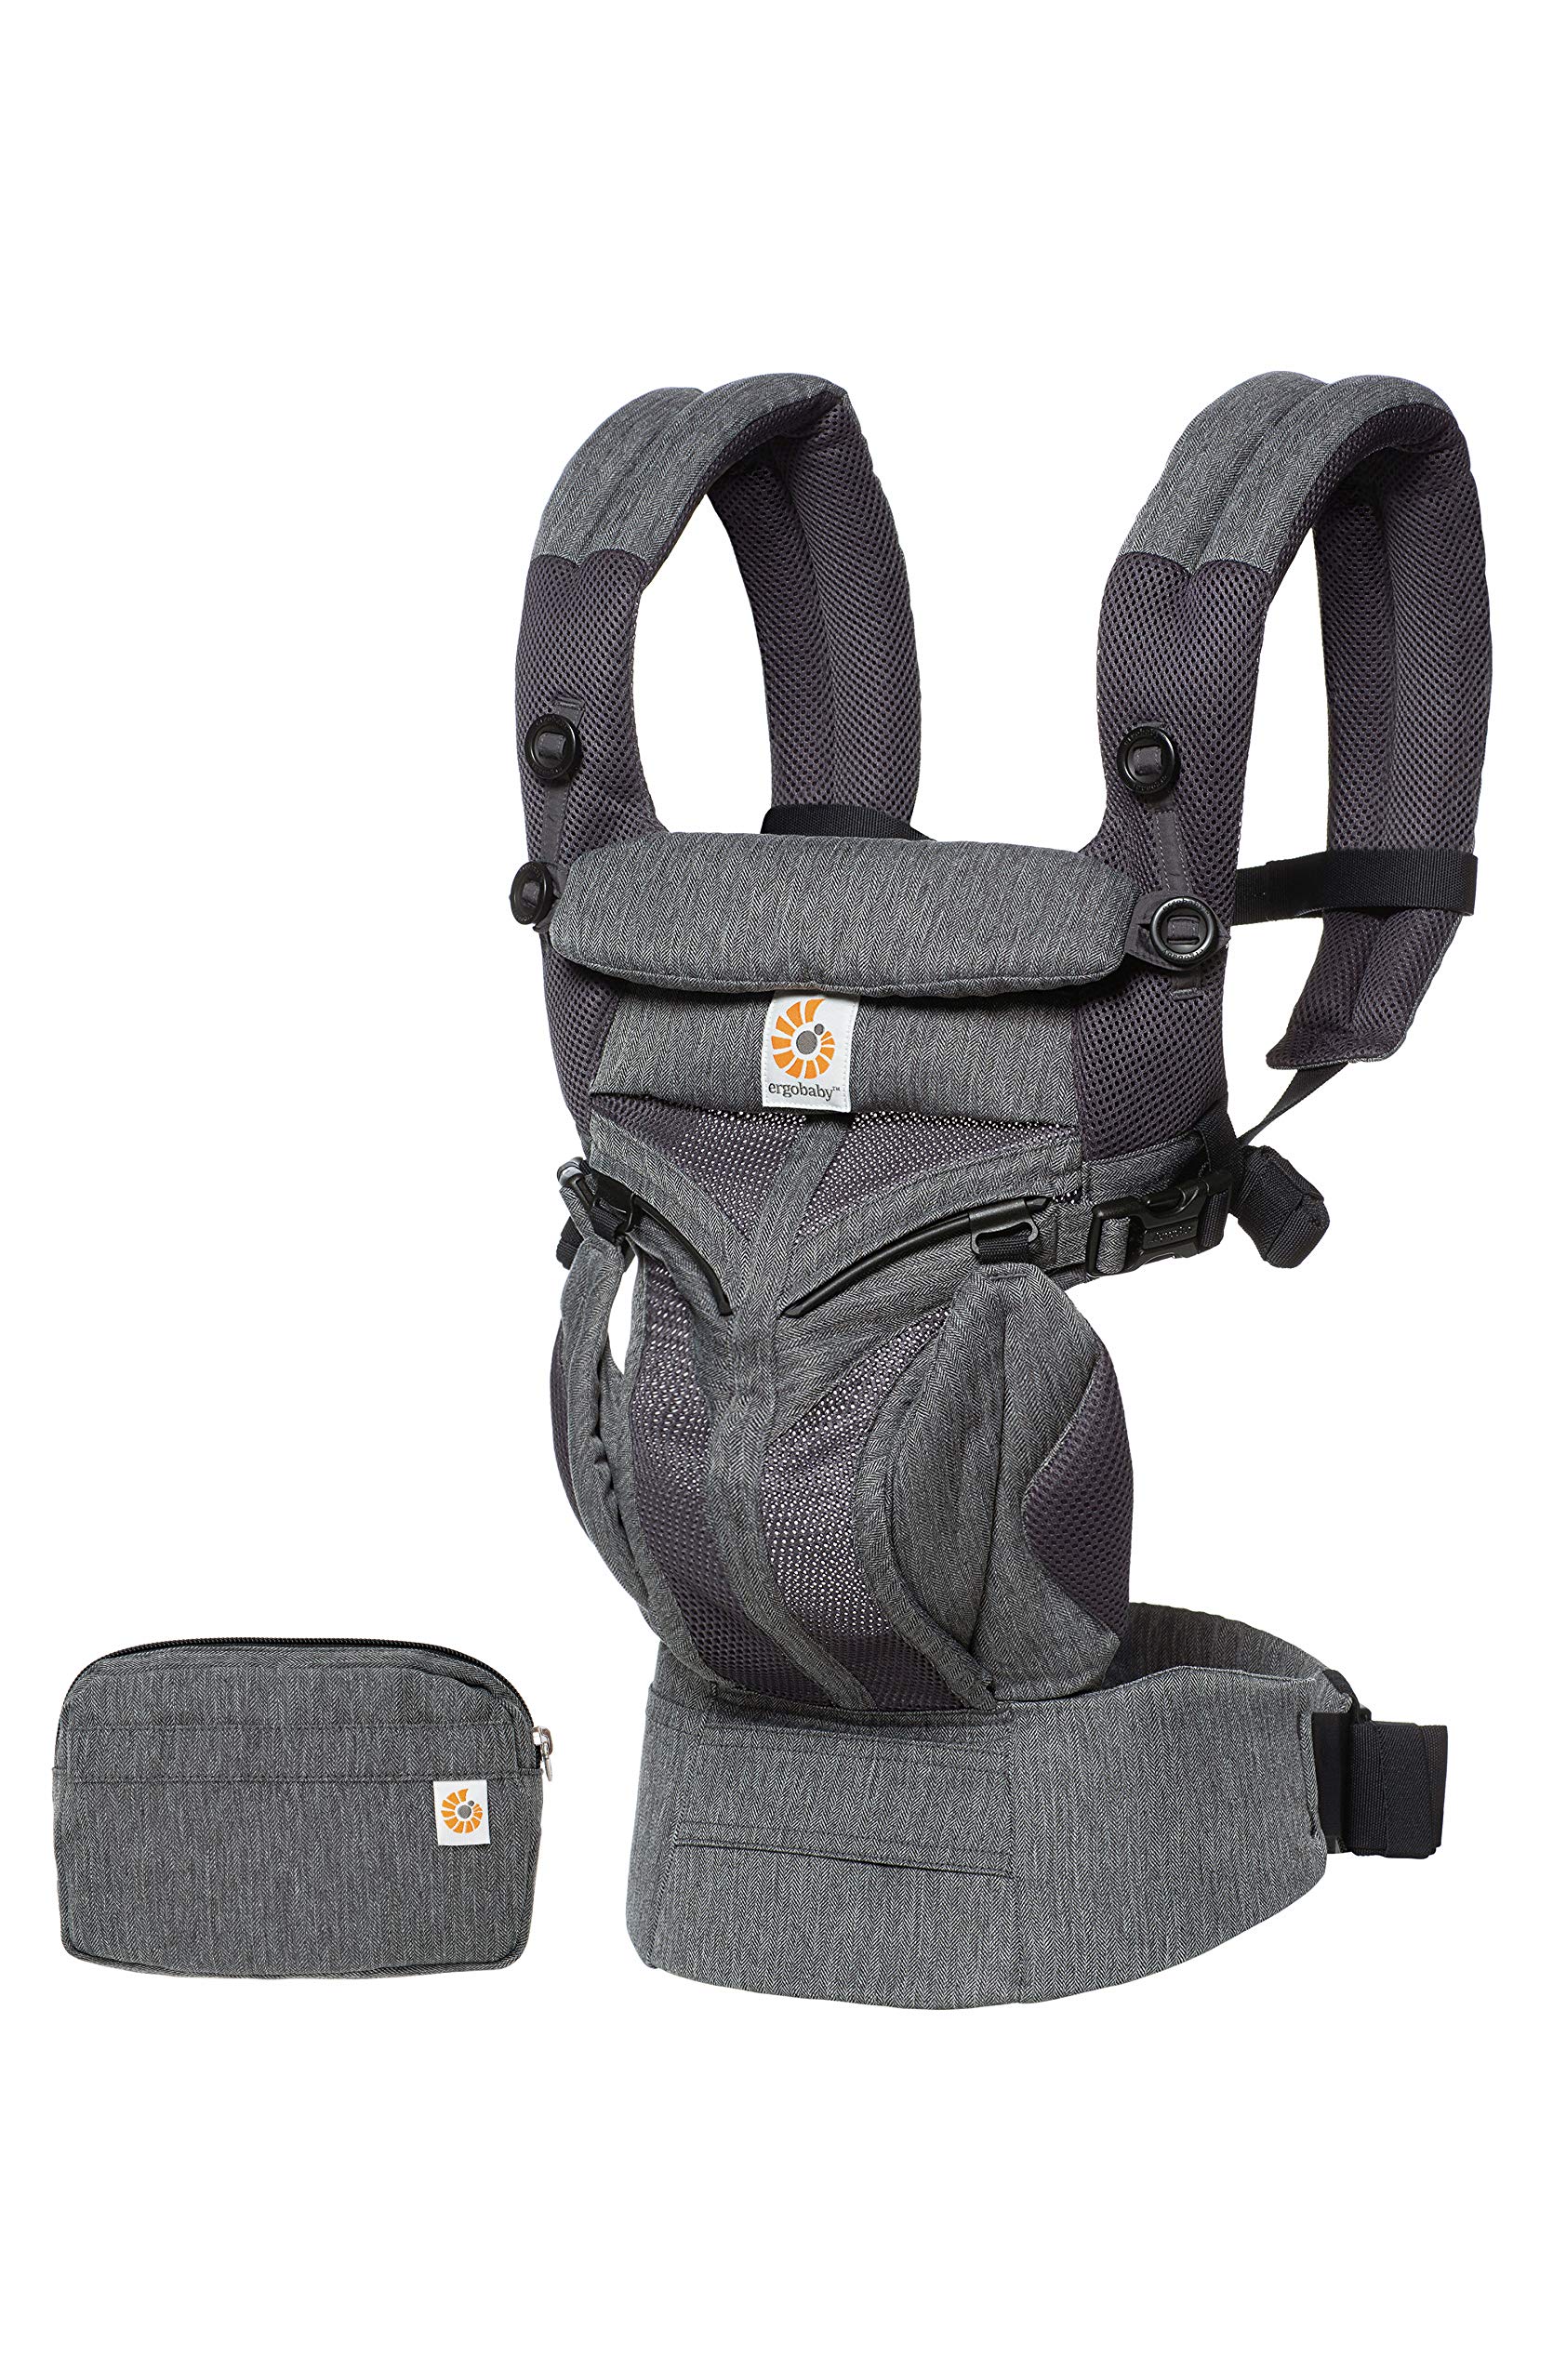 Ergobaby Omni 360 All-Position Baby Carrier for Newborn to Toddler with Lumbar Support & Cool Air Mesh (7-45 Lb), Classic Weave  - $86.99 at Amazon